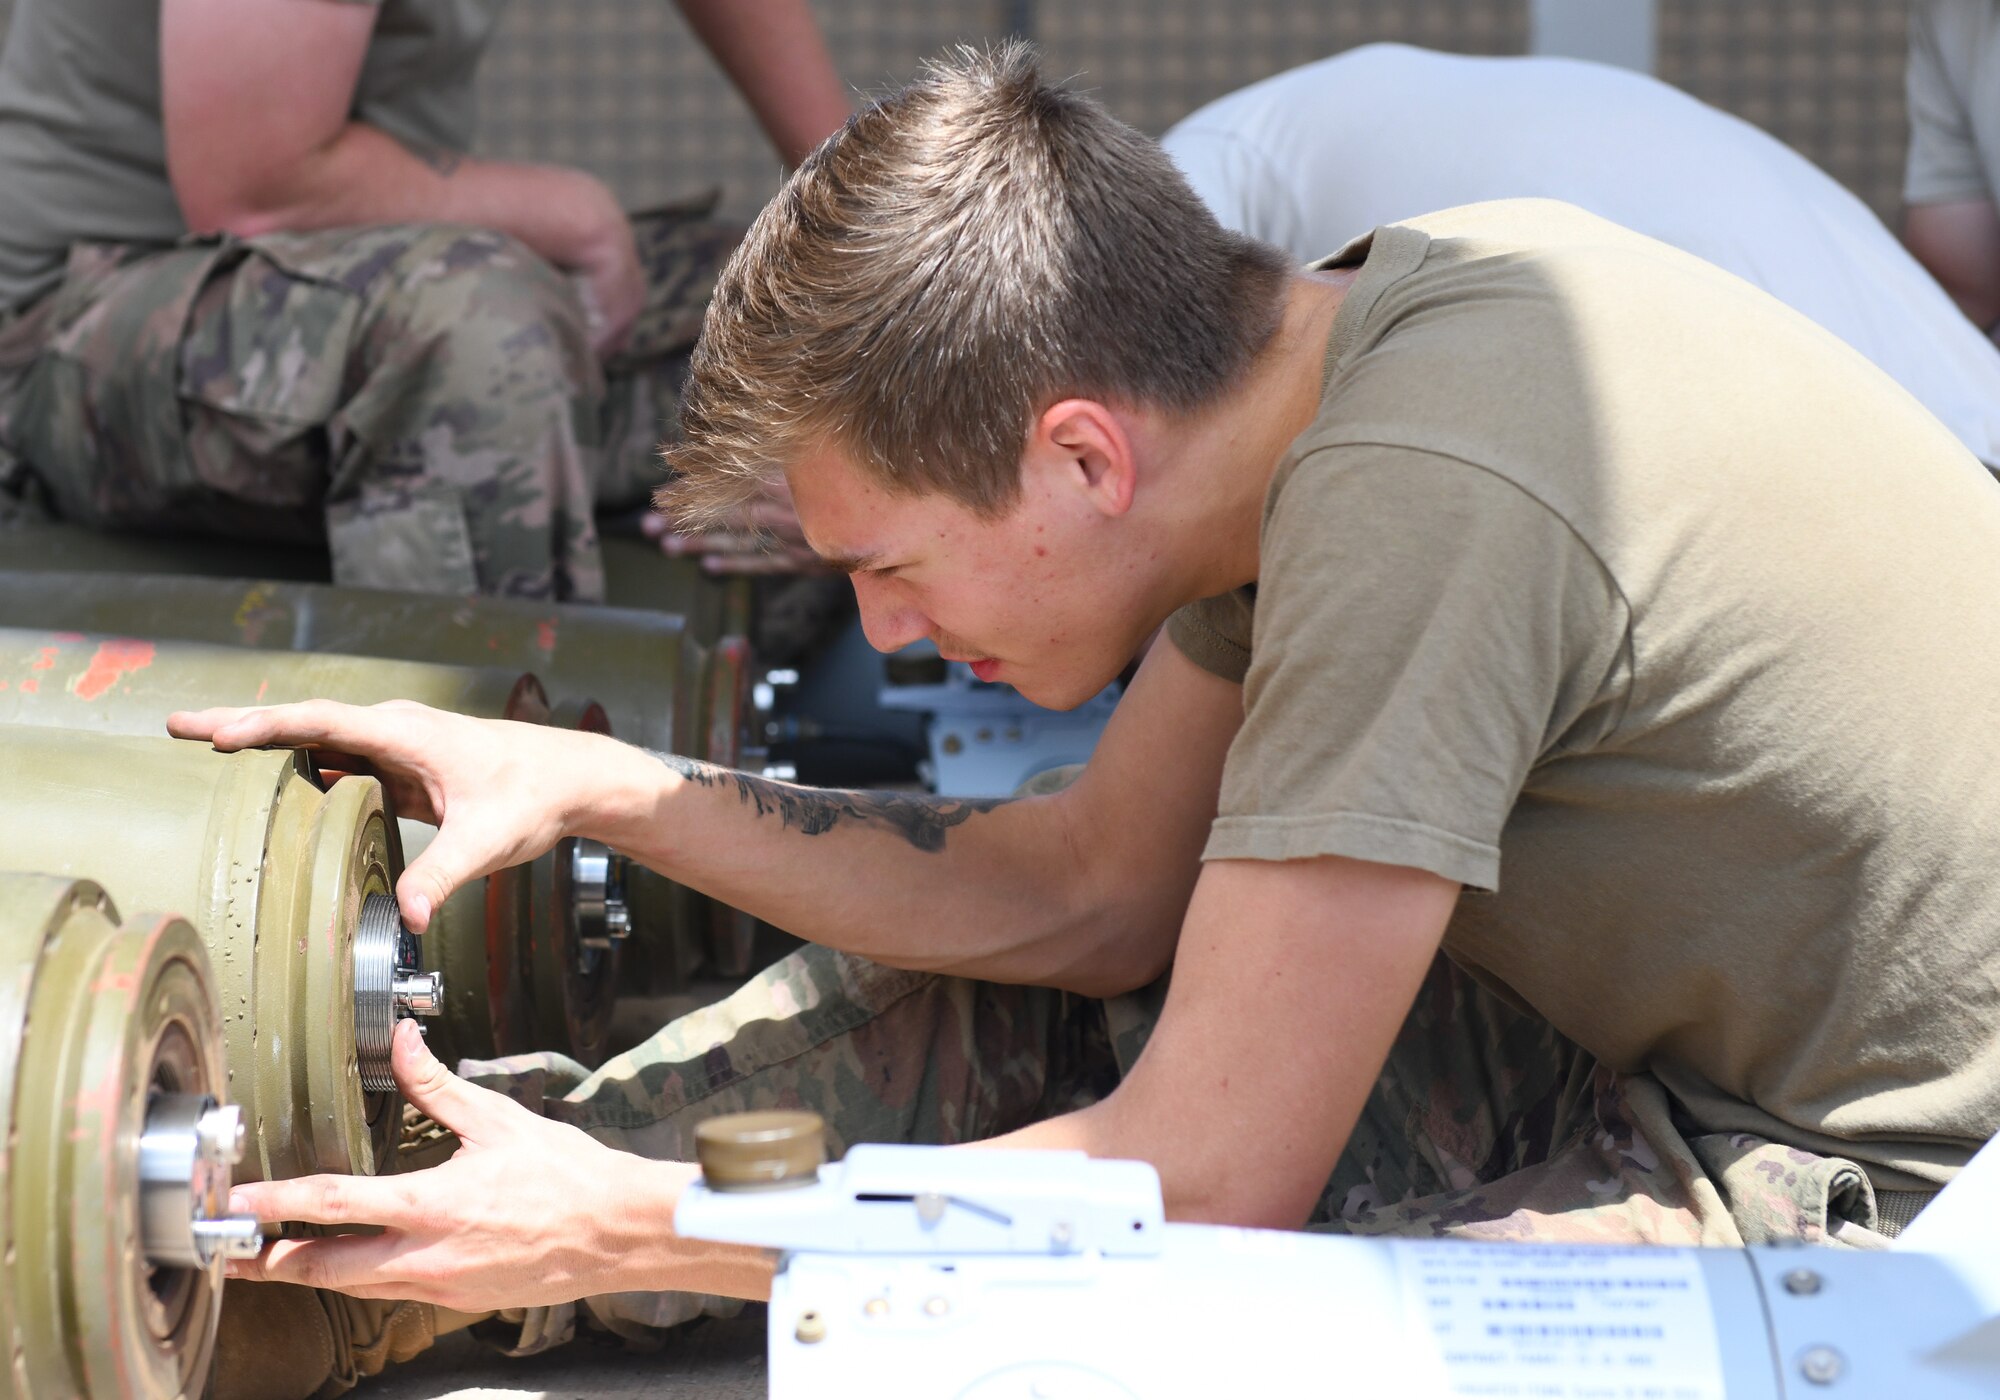 U.S. Air Force Airman 1st Class Noah Keene, 726th Expeditionary Air Base Squadron munitions crew chief, installs a fuse assembly during a bomb build at Chabelley Airfield, Djibouti, Nov. 12, 2019. The 726th EABS Munitions Systems Airmen build, inspect and store all munitions at the airfield, ensuring mission effectiveness at a moment’s notice. (U.S. Air Force photo by Staff Sgt. Alex Fox Echols III)